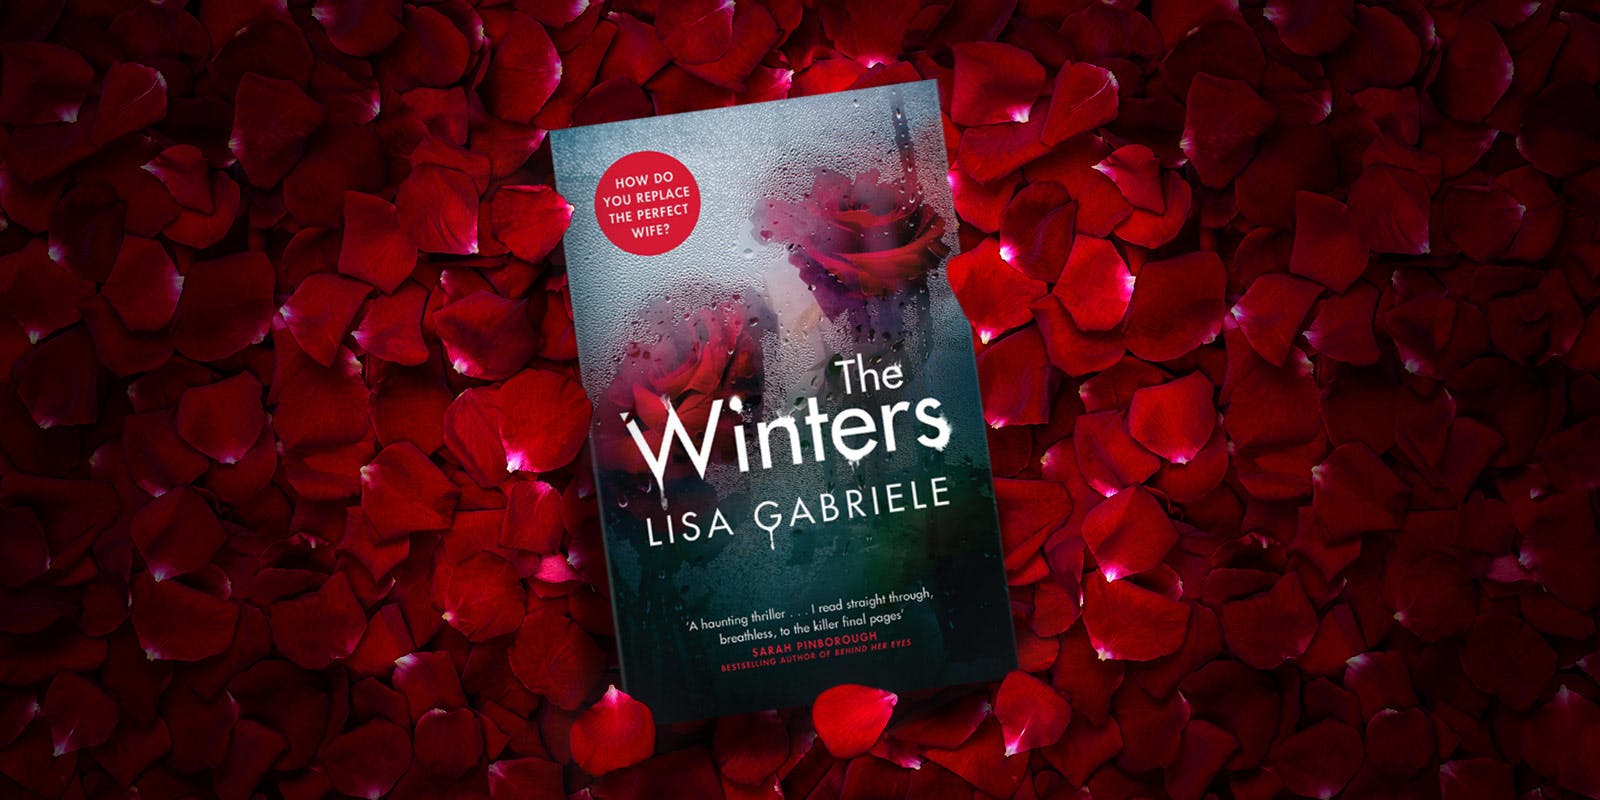 The Winters book club notes